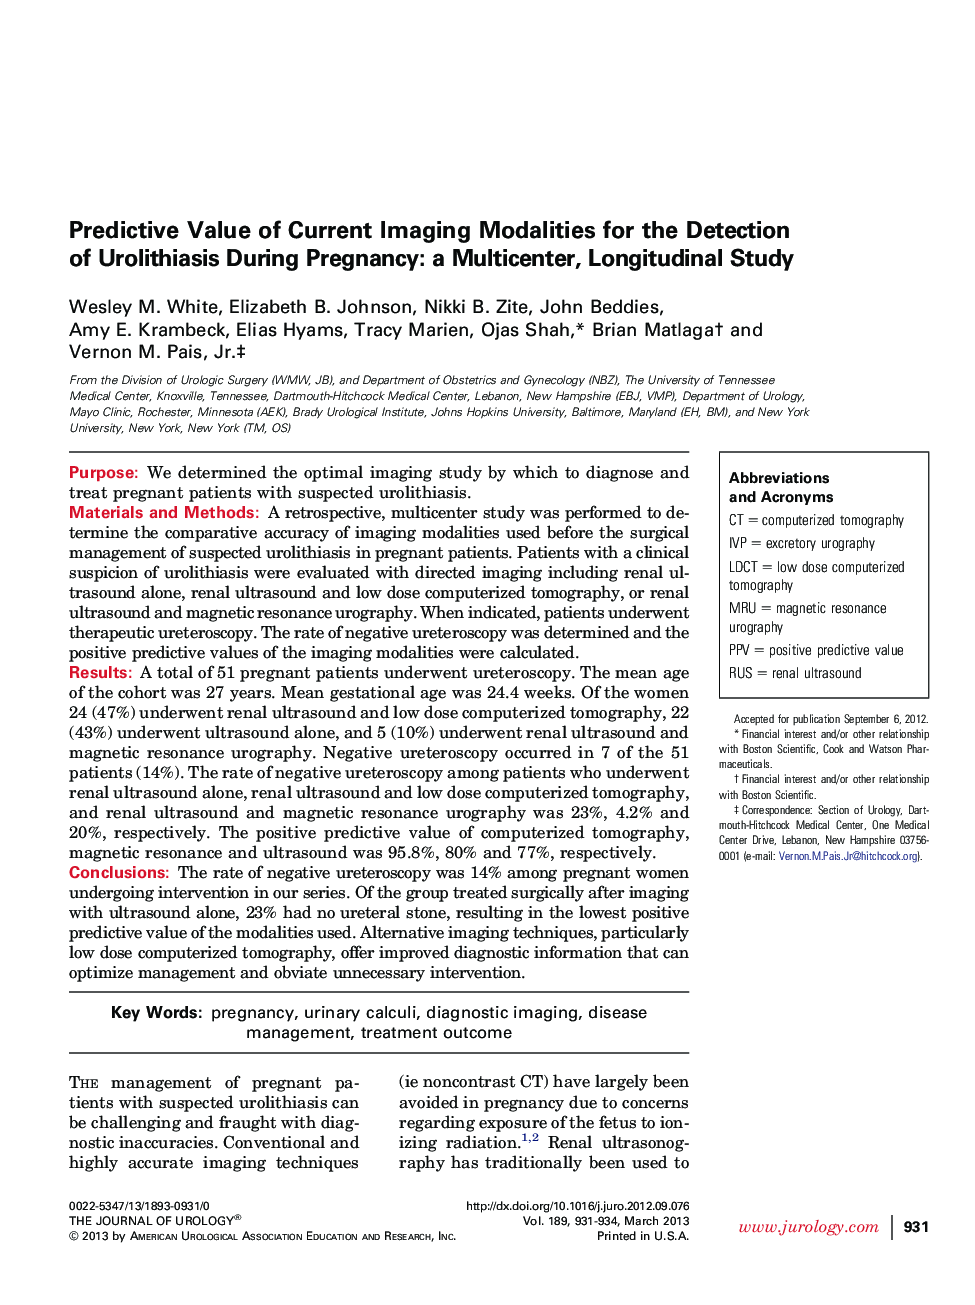 Predictive Value of Current Imaging Modalities for the Detection of Urolithiasis During Pregnancy: a Multicenter, Longitudinal Study